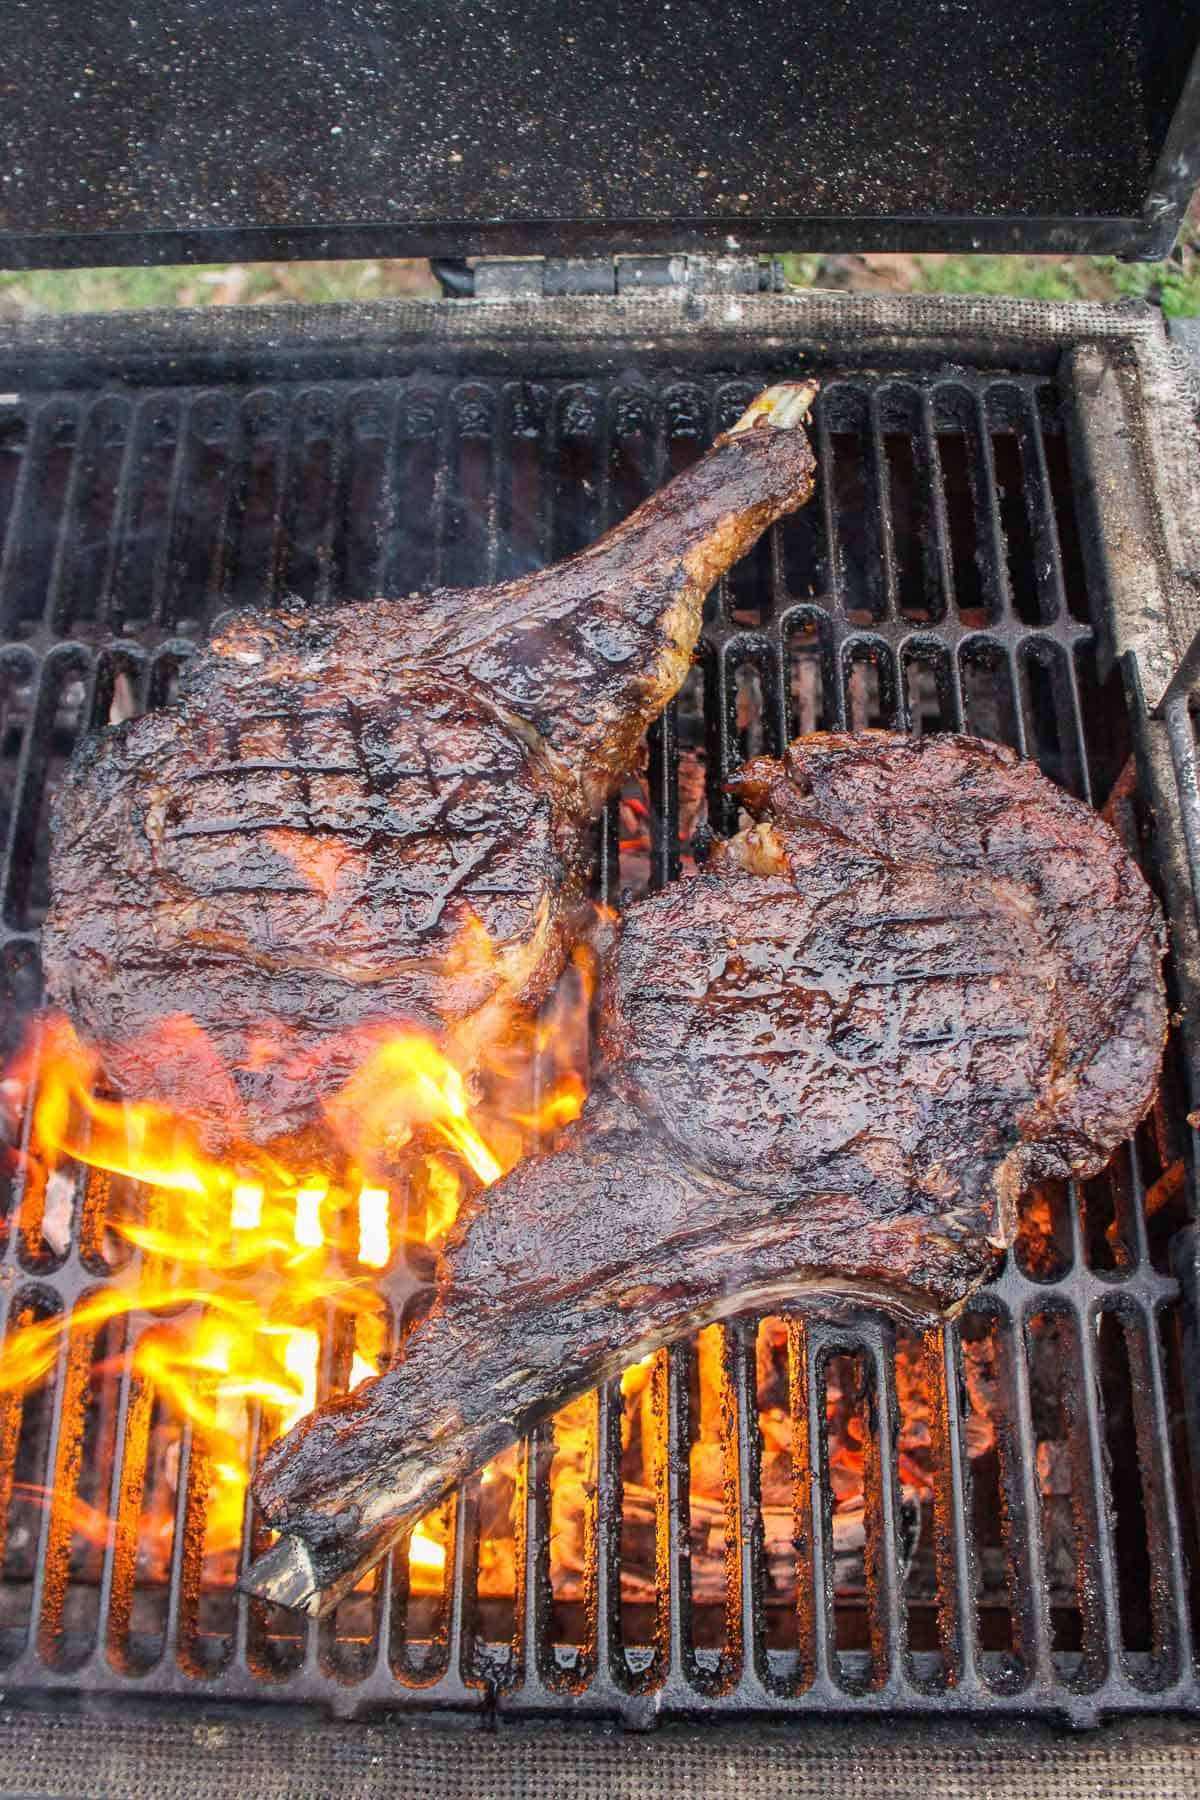 The grilled ribeyes being seared directly over the flames.